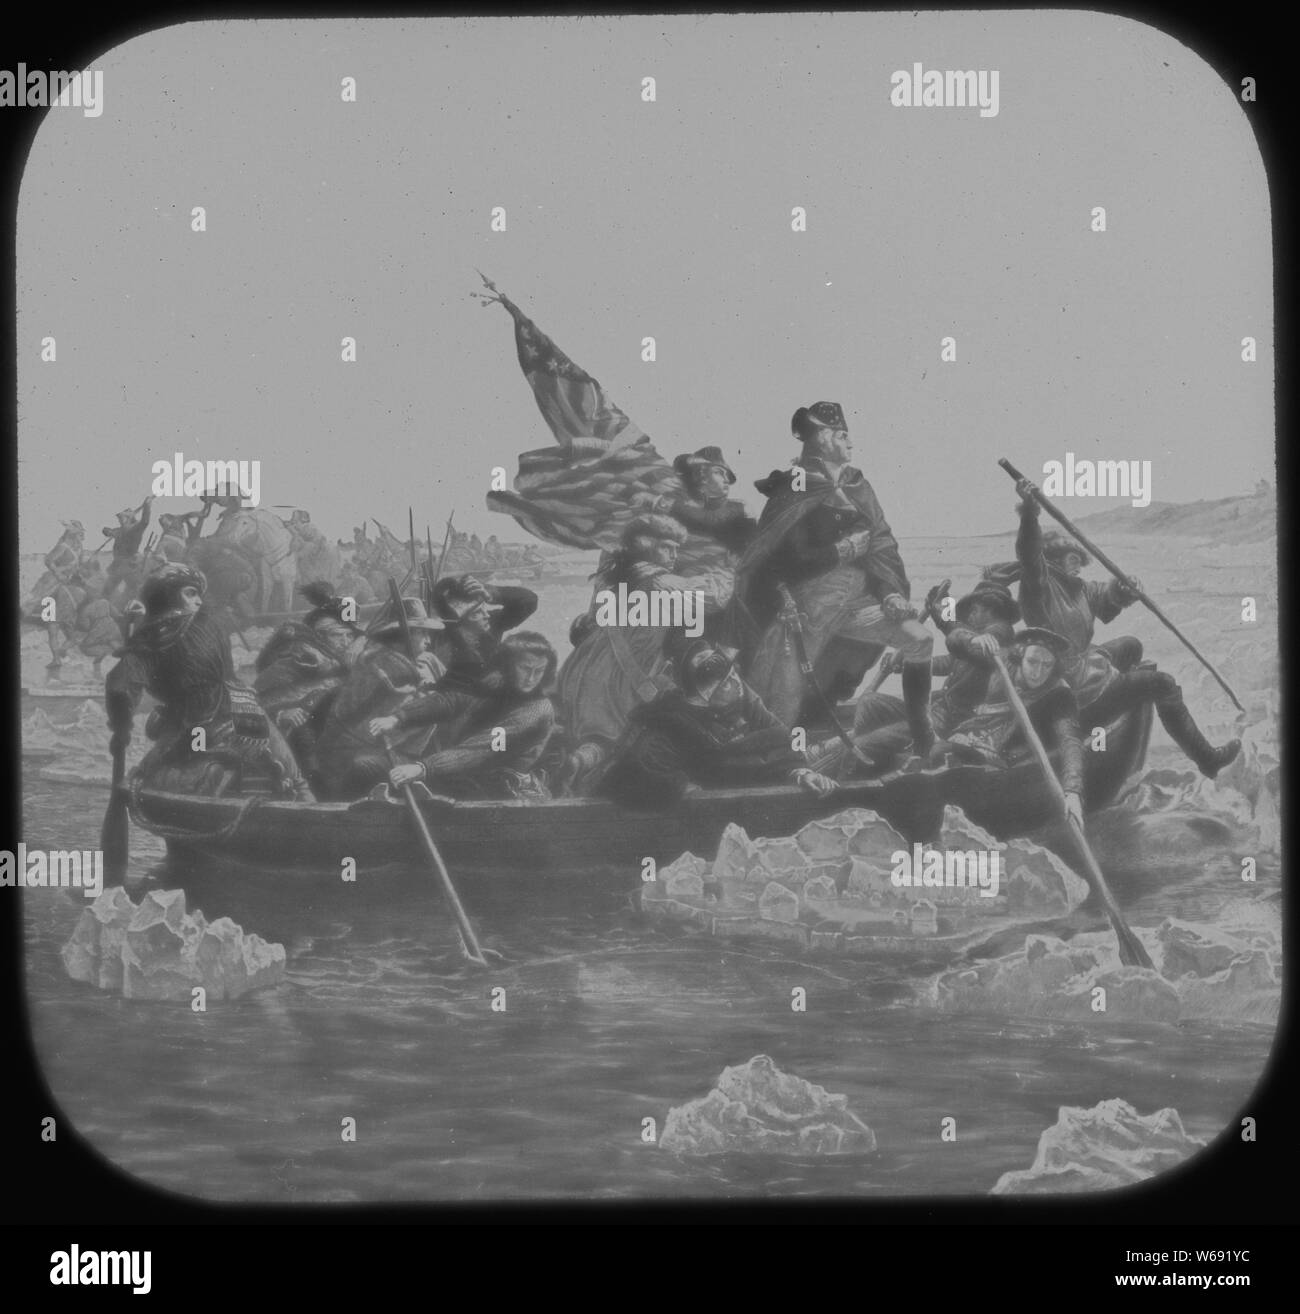 Washington Crossing the Delaware. December 1776. Copy from painting by Emanuel Leutze, 1851., ca. 1910 - 1950; General notes:  Use War and Conflict Number 29 when ordering a reproduction or requesting information about this image. Stock Photo